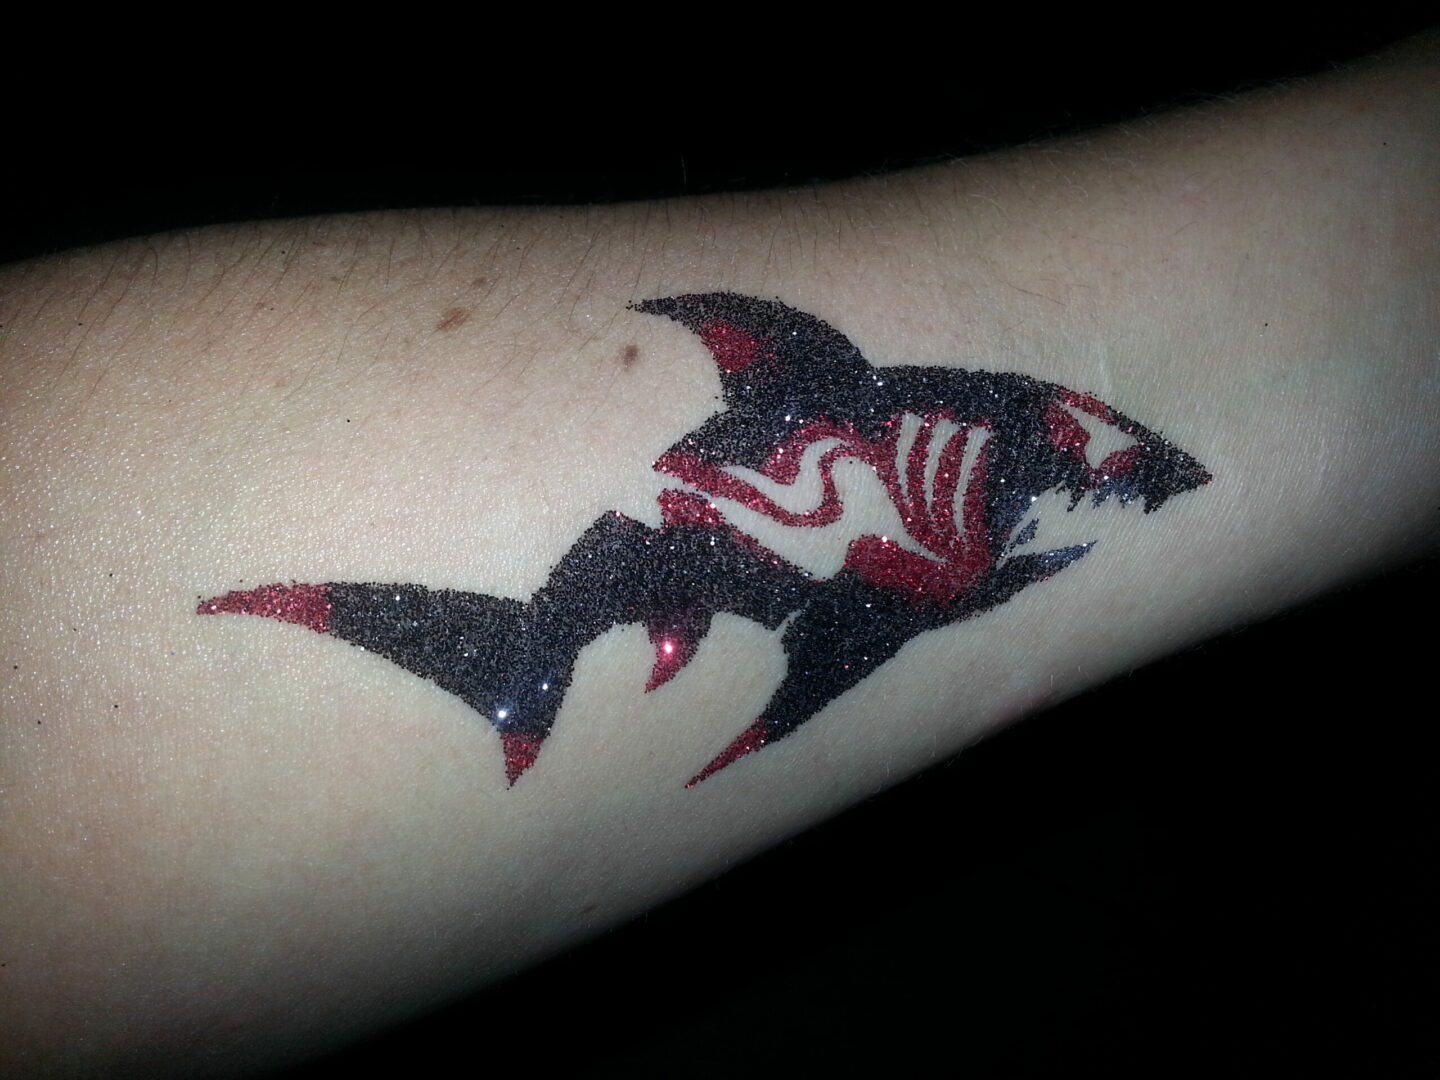 A tattoo of a shark with red and black paint.